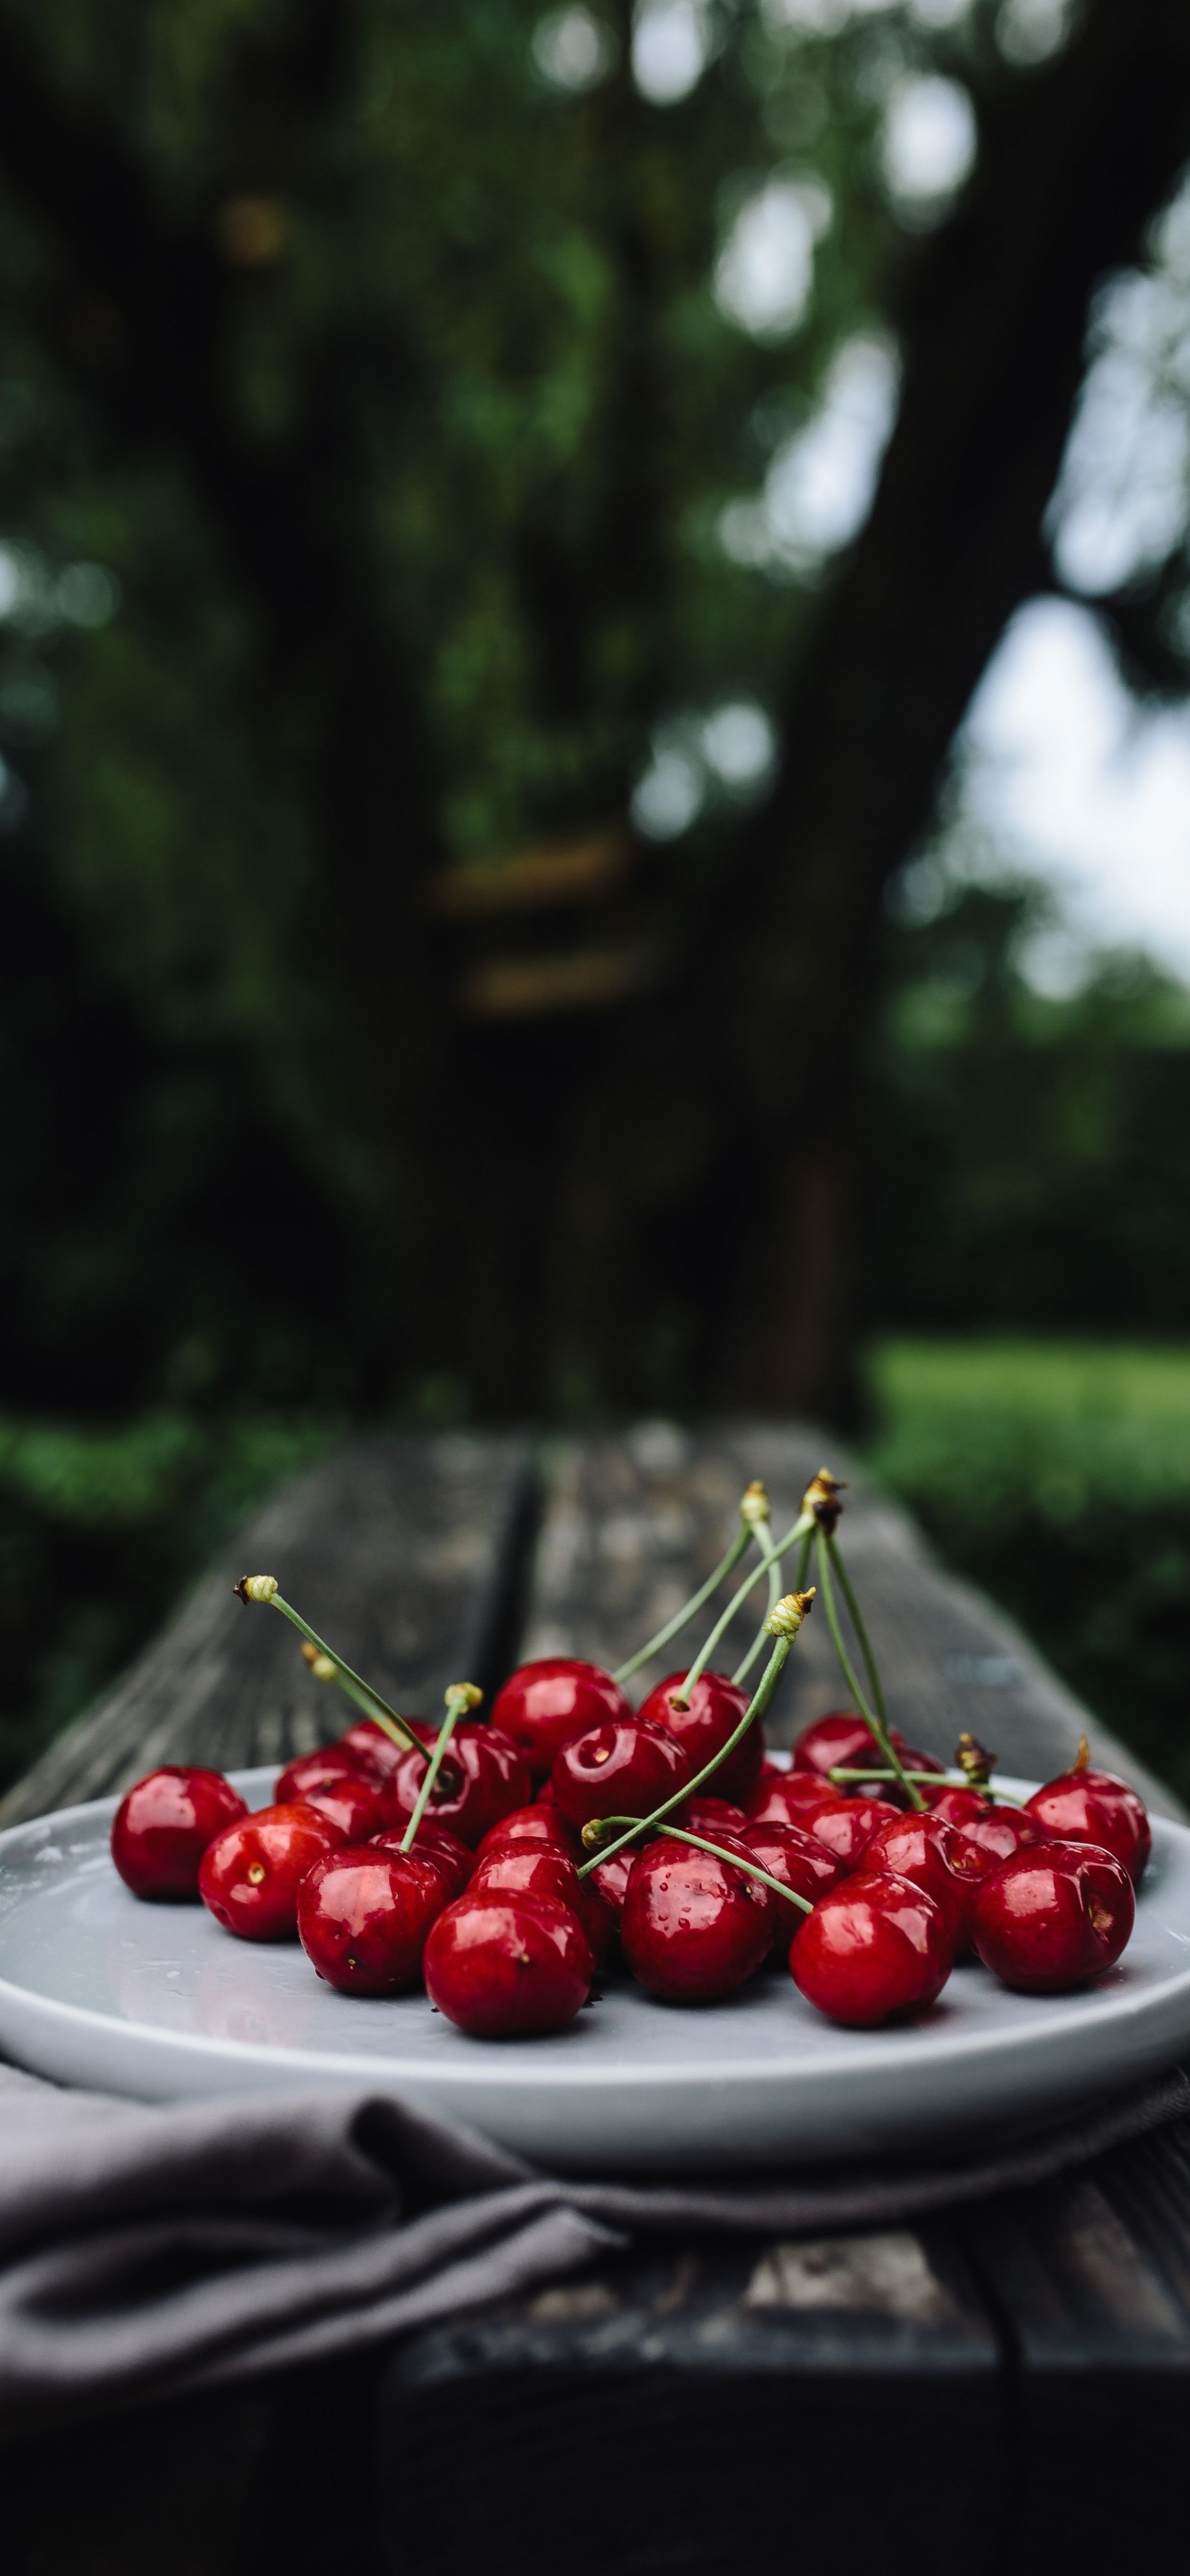 Red Cherries on White Ceramic Plate. Wallpaper in 1242x2688 Resolution